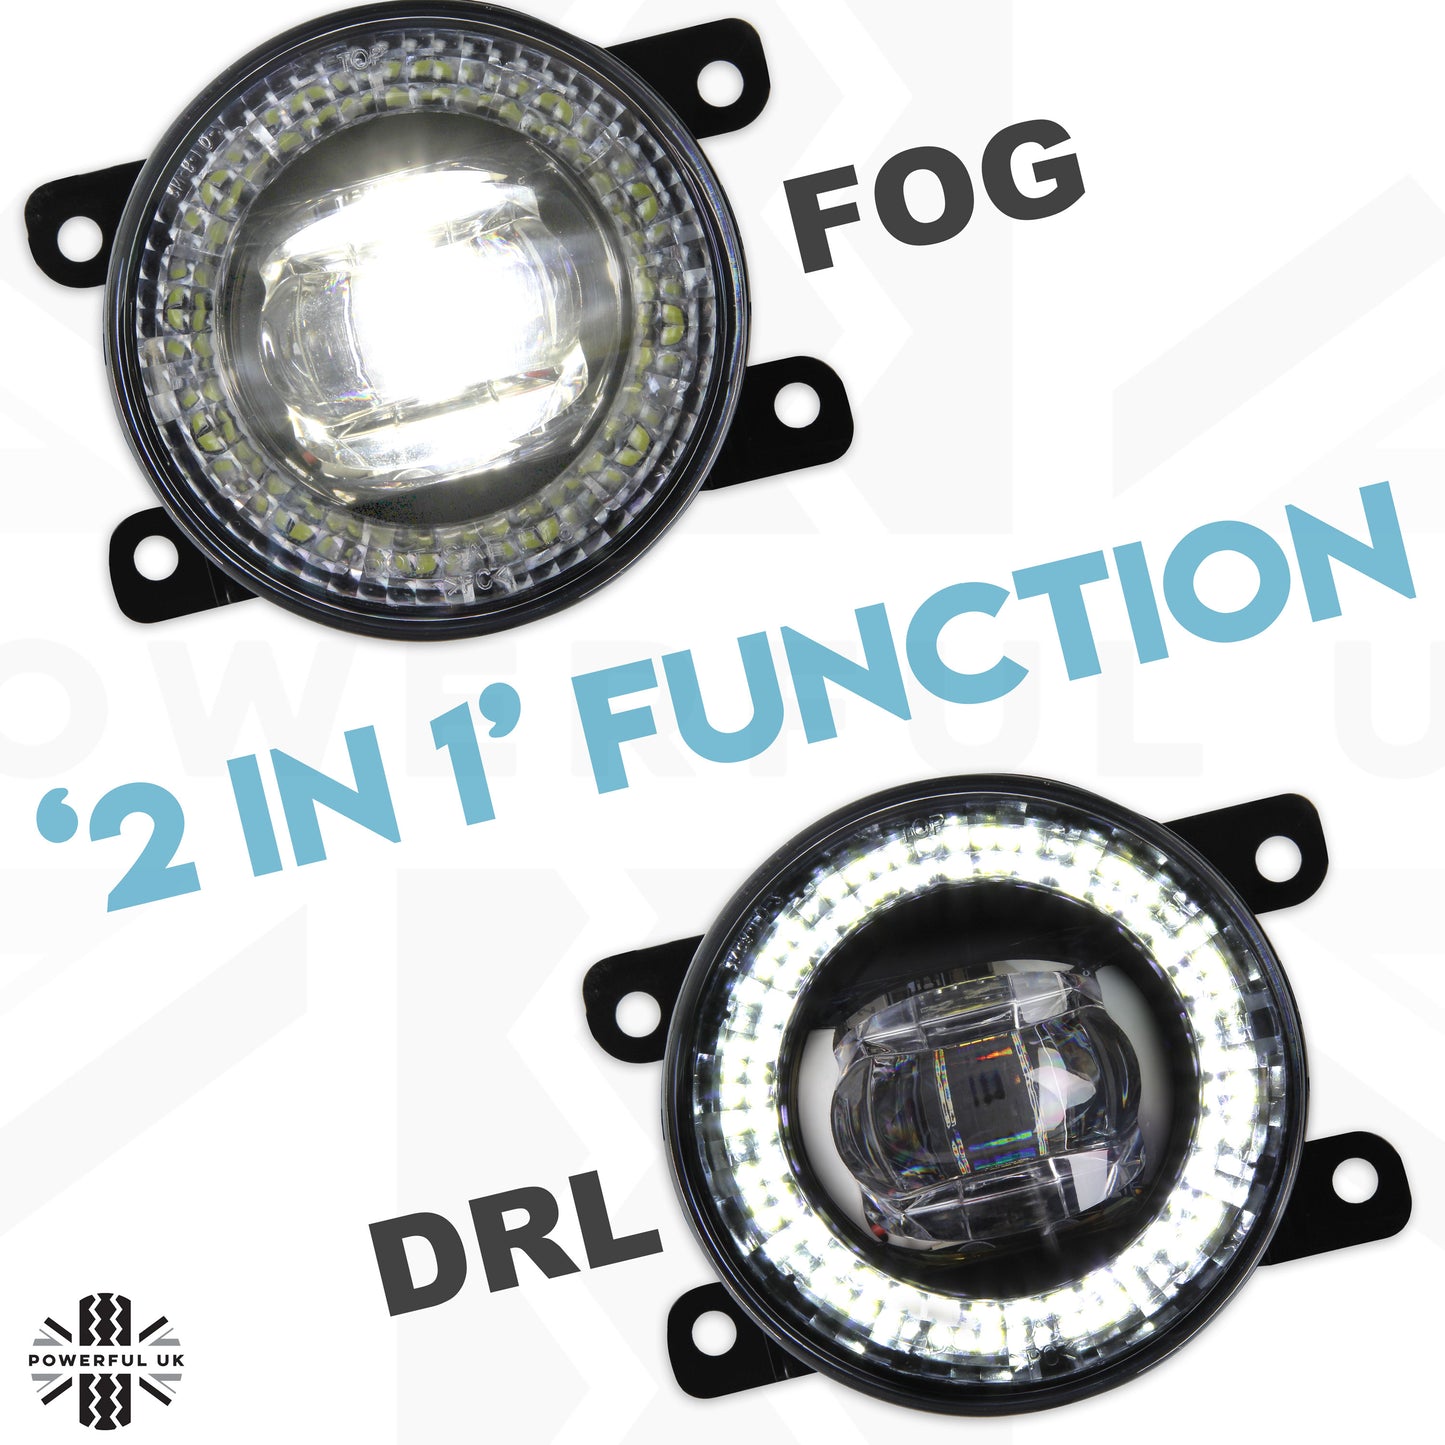 2 in 1 LED Fog/DRL lamp for Suzuki Jimny (fits all years)